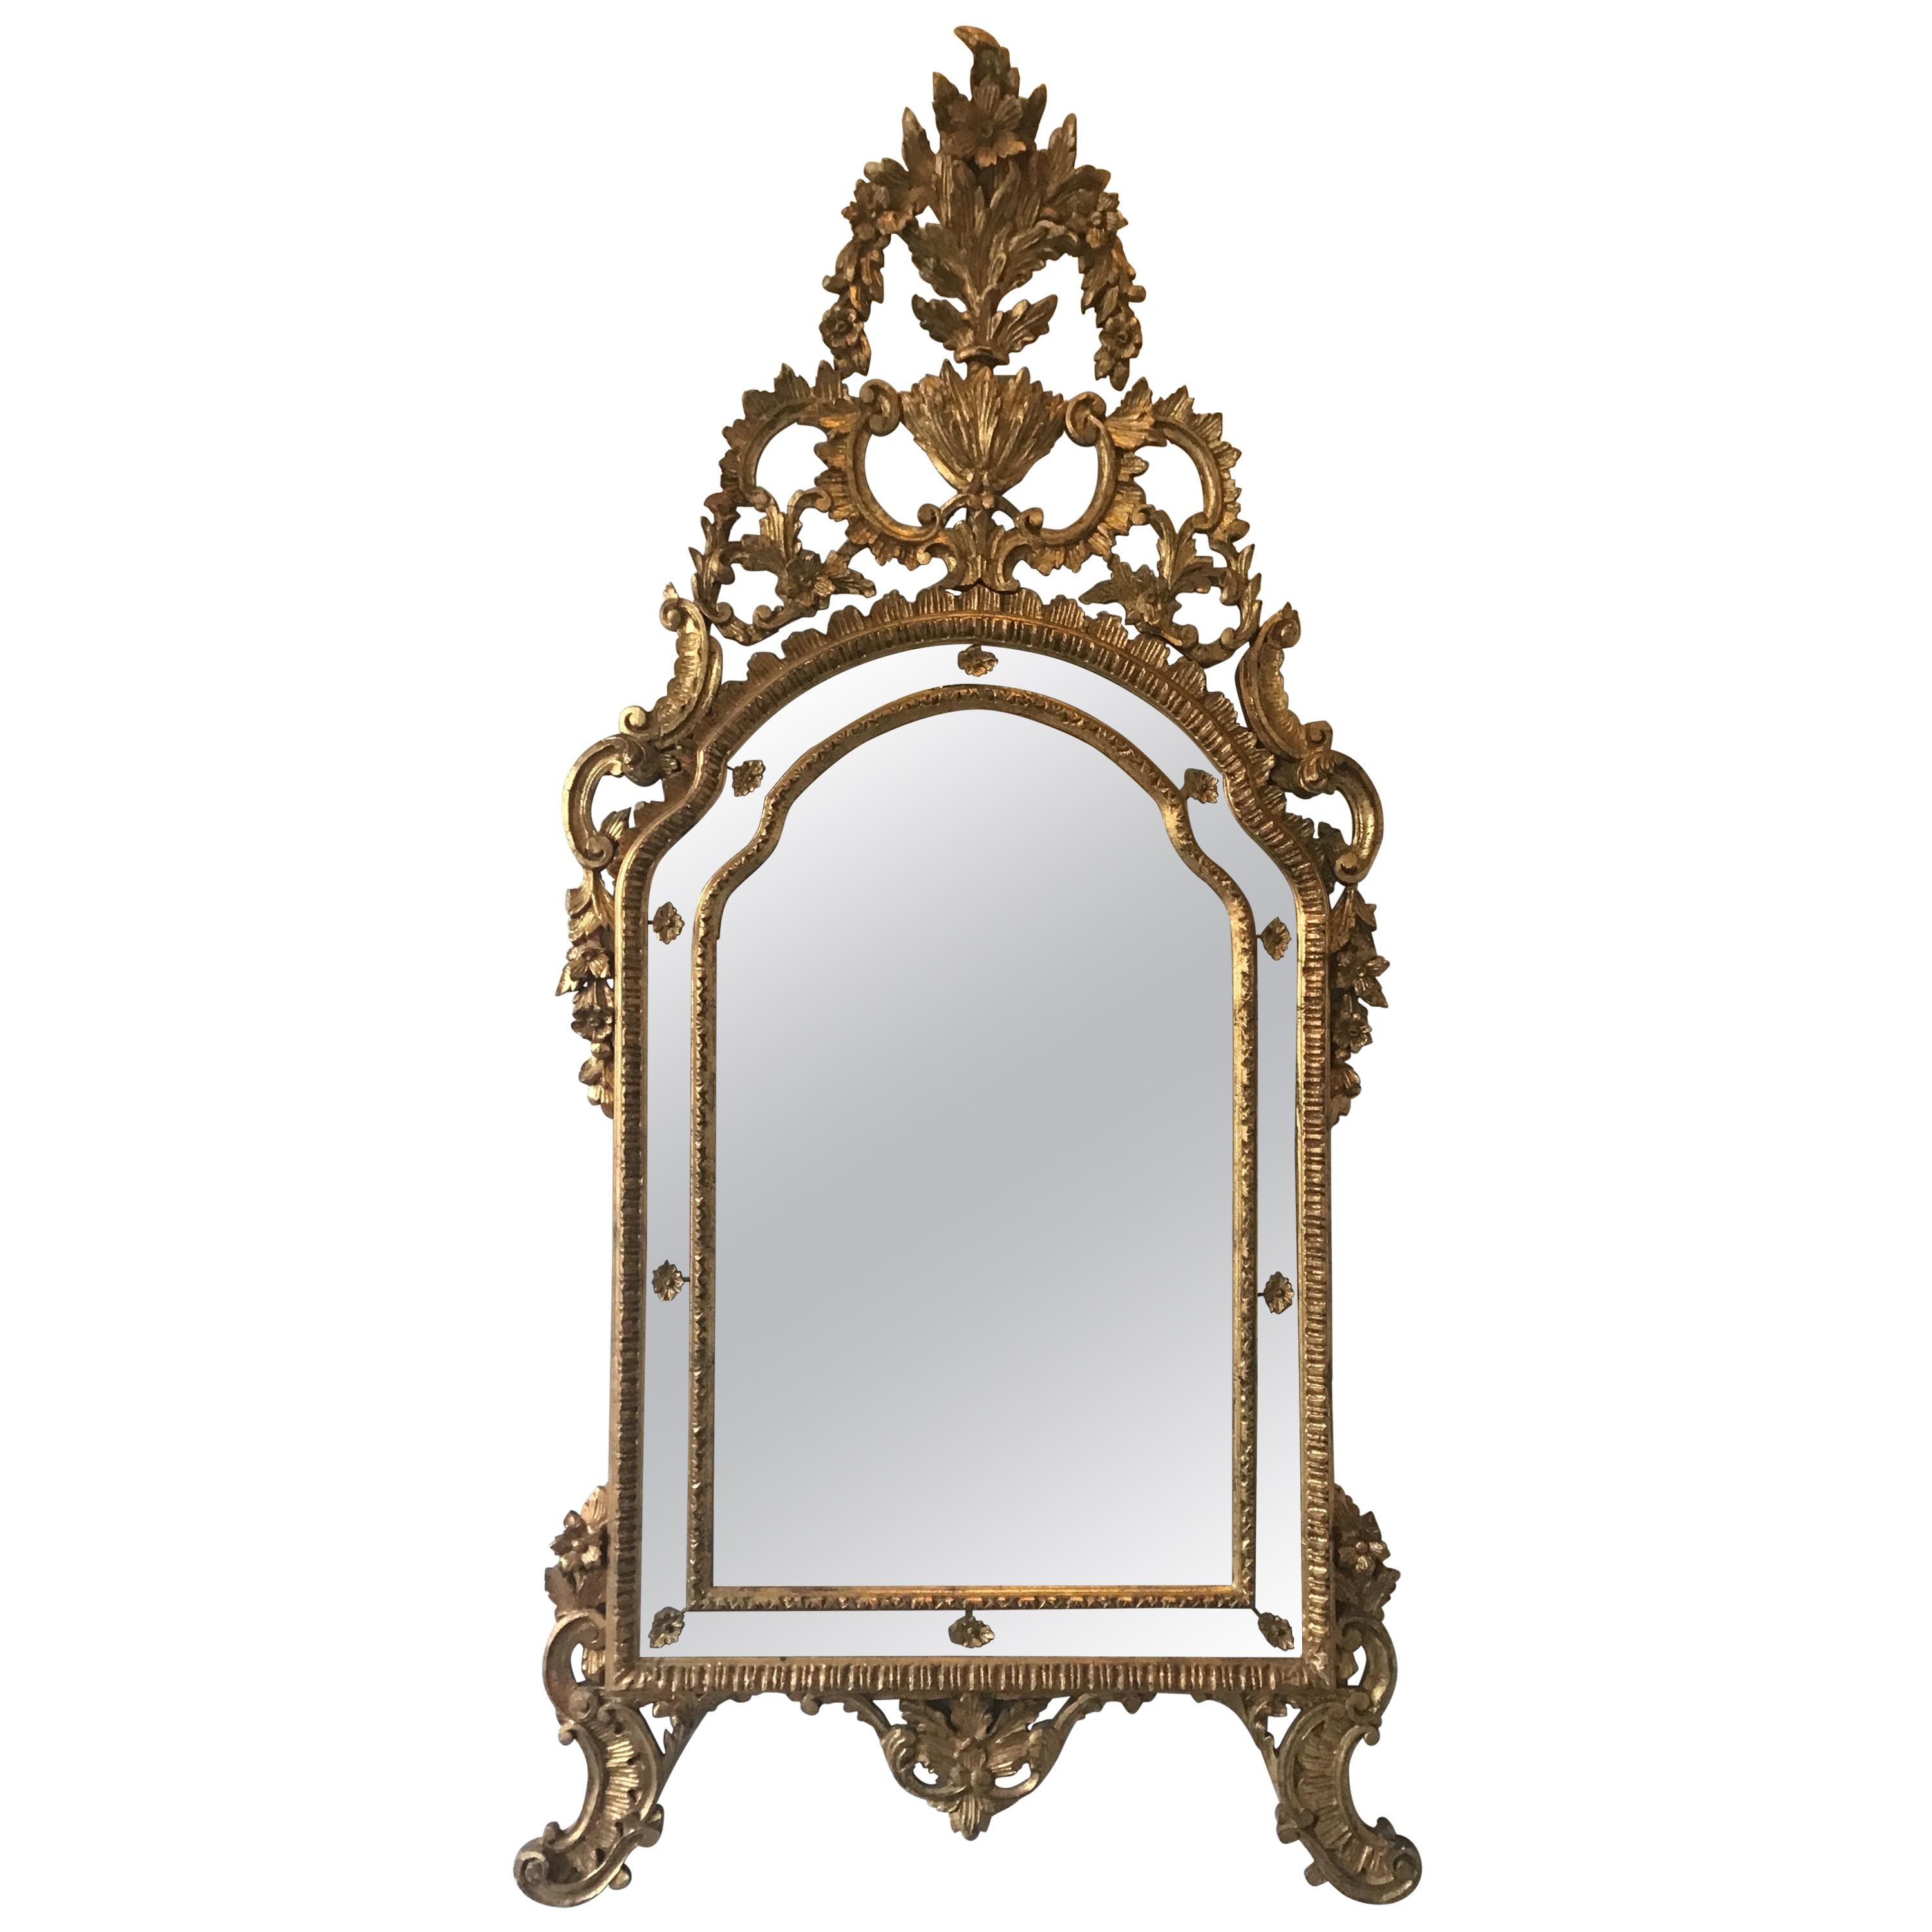 Large Rococo Style Italian Carved Wood Gilt Mirror